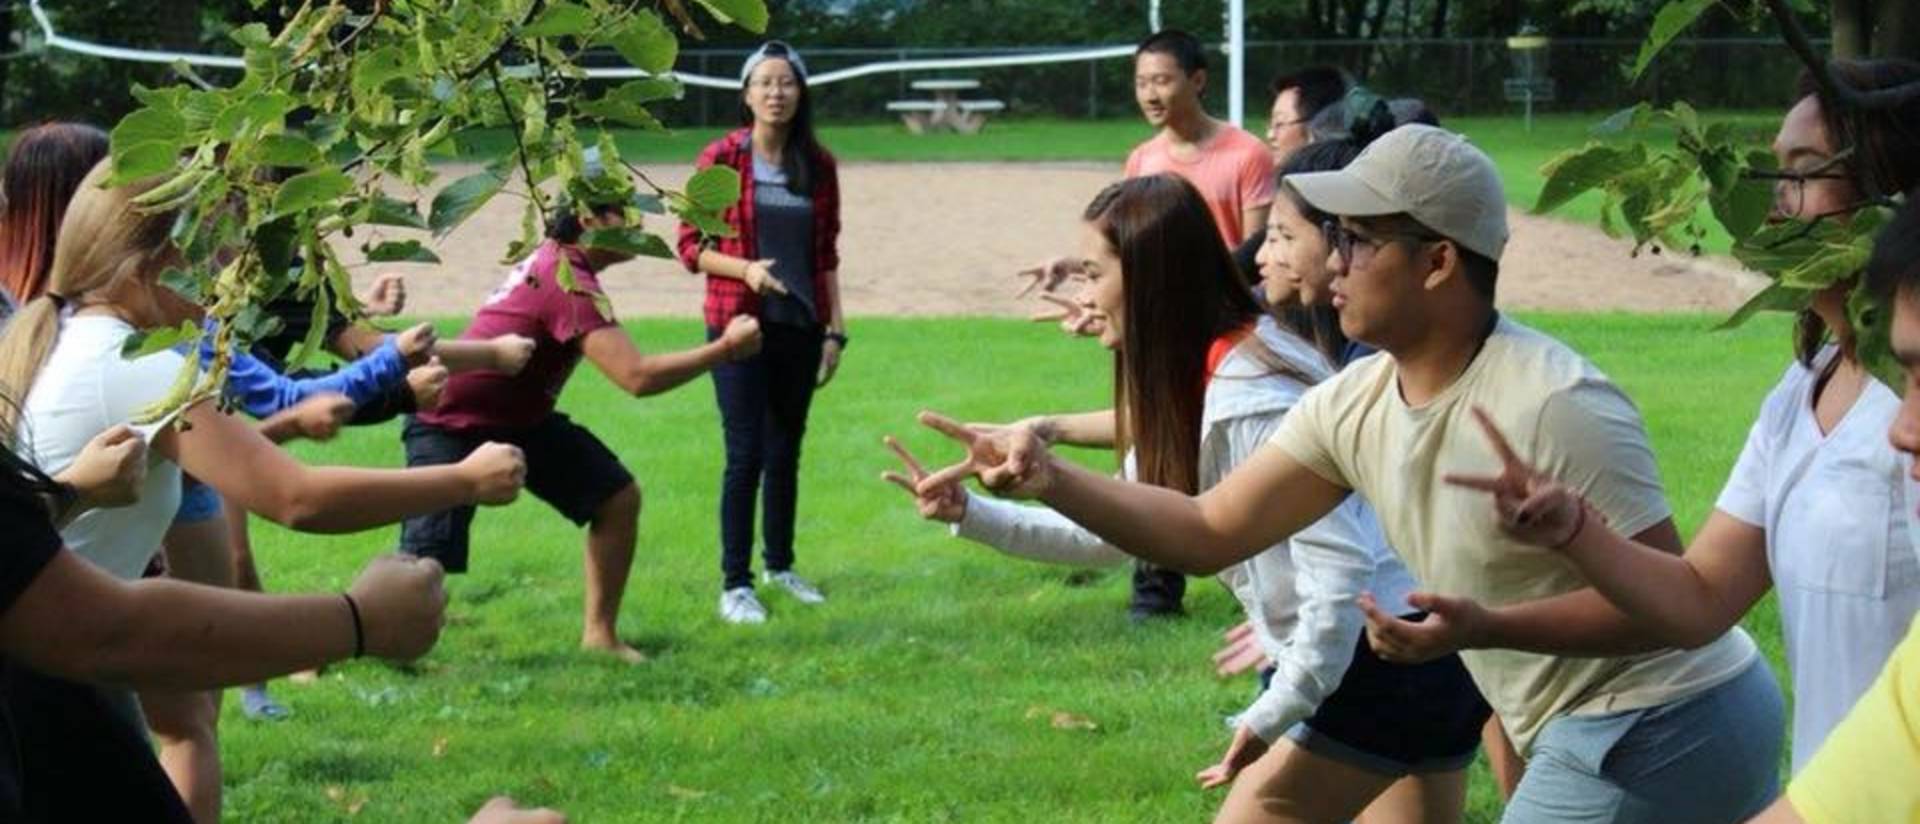 Students in the Hmong living community working together as a group outside